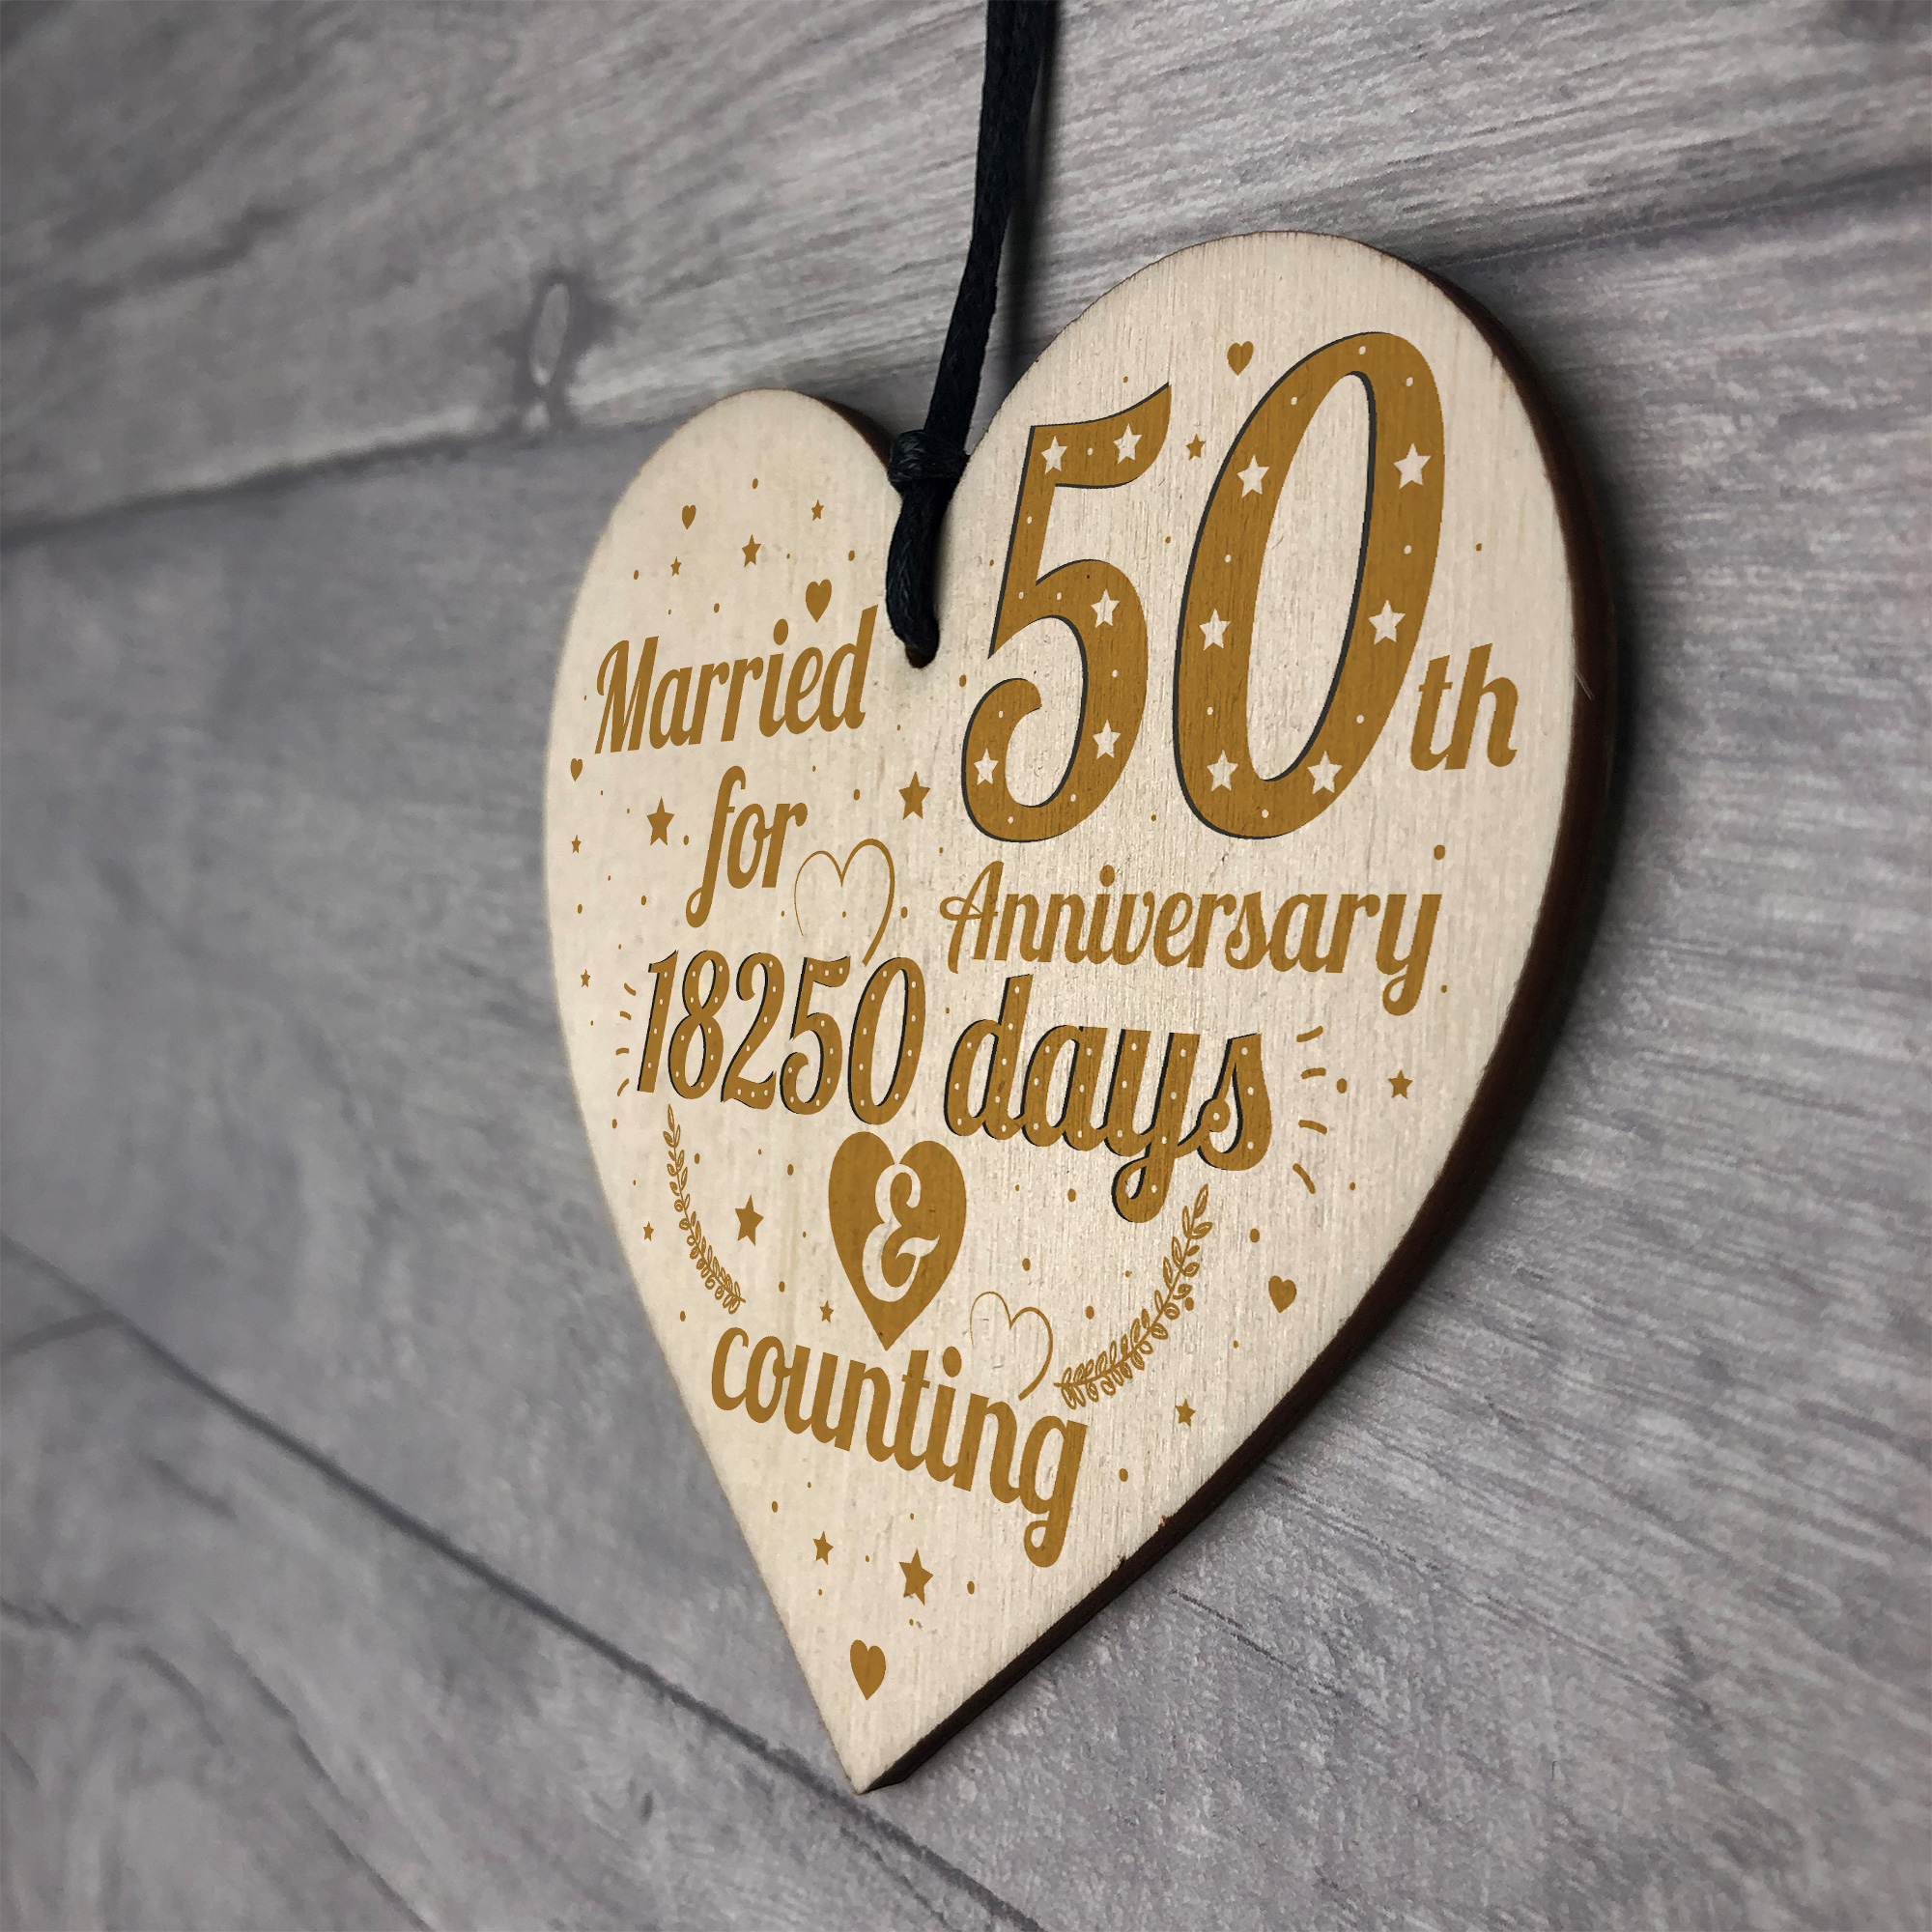 Good Anniversary Gifts
 50th Wedding Anniversary Wood Heart Gift Gold Fifty Years